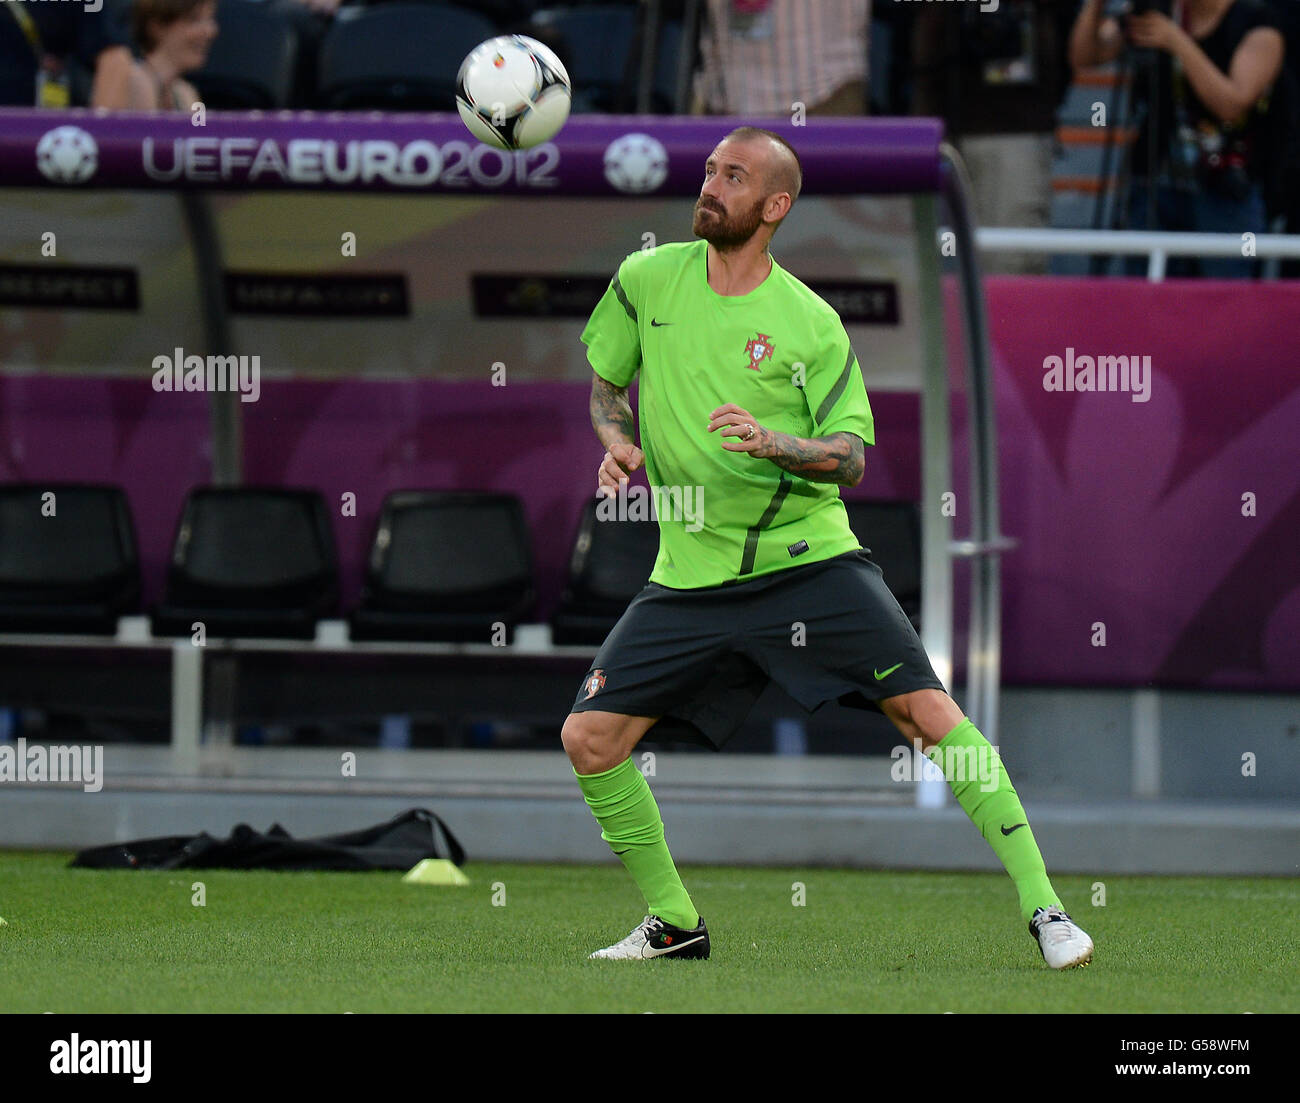 Portugal's Raul Meireles during training at the Donbass Arena in Donetsk ahead of their Semi Final match against Spain tomorrow Stock Photo